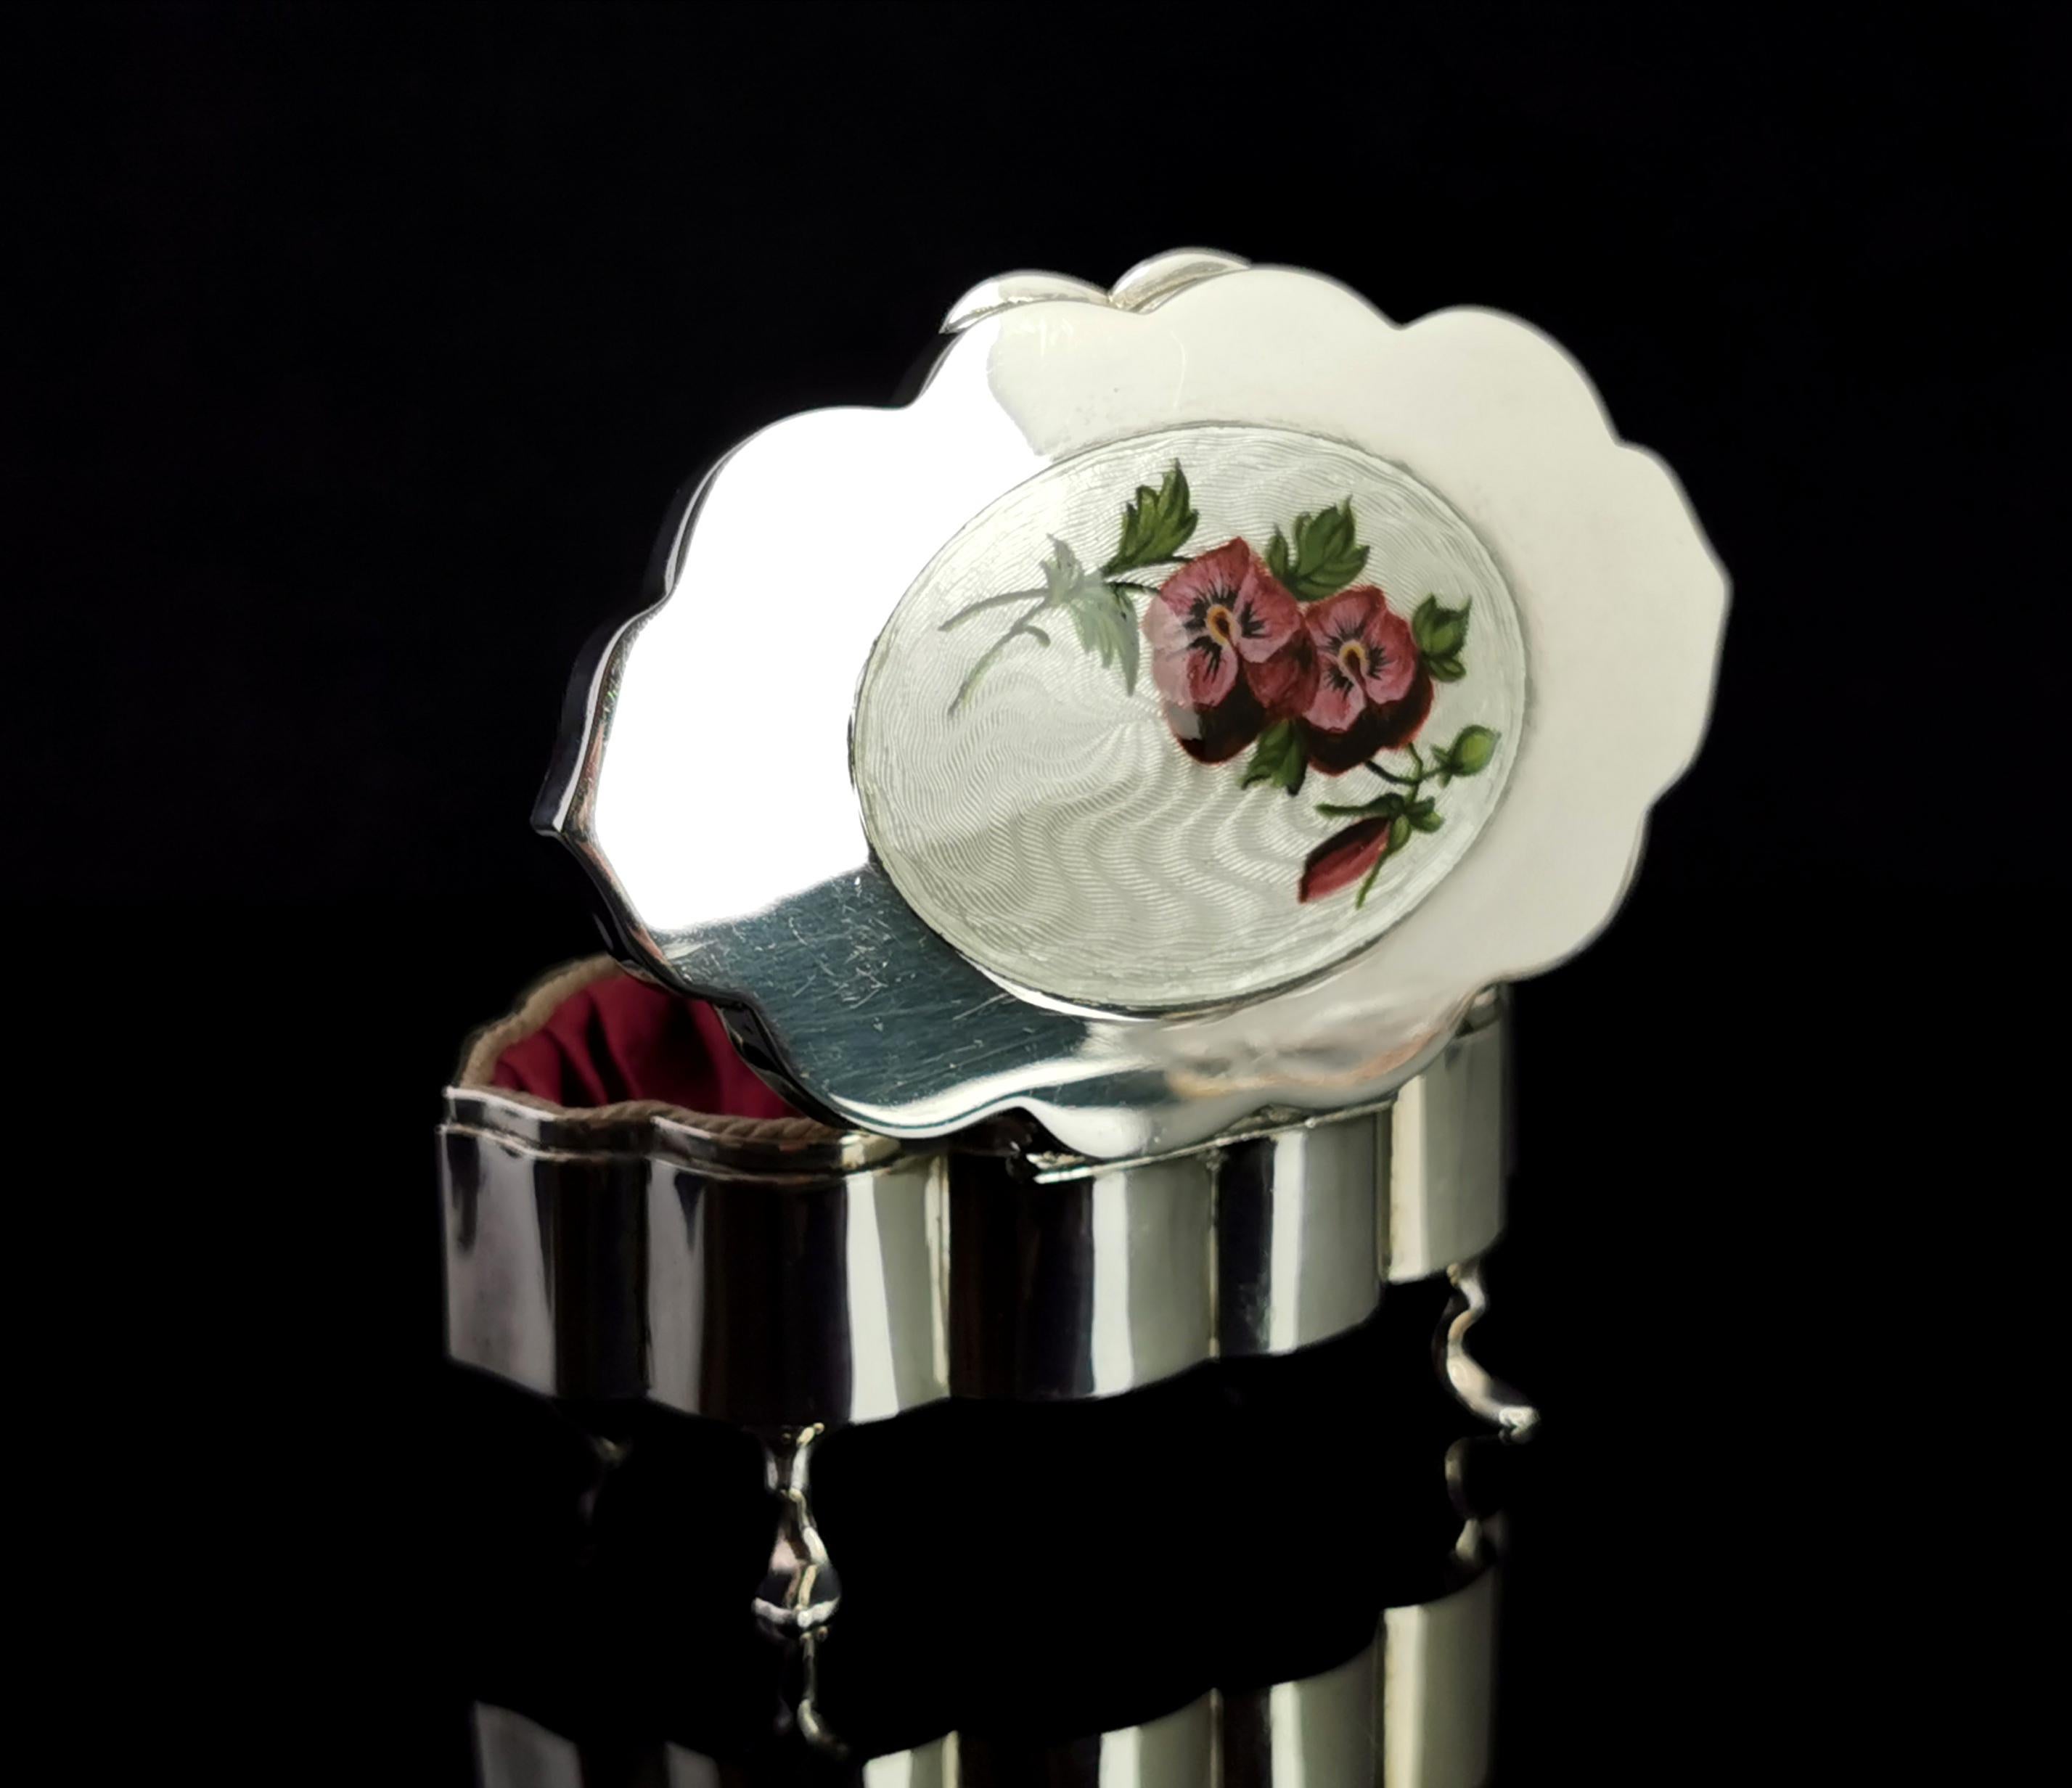 An exceptionally fine antique sterling silver and enamel jewellery casket.

Beautifully shaped sterling silver box standing on four raised paw feet.

To the lid there is a white guilloche enamelled oval panel hand enamelled with a fine spray of